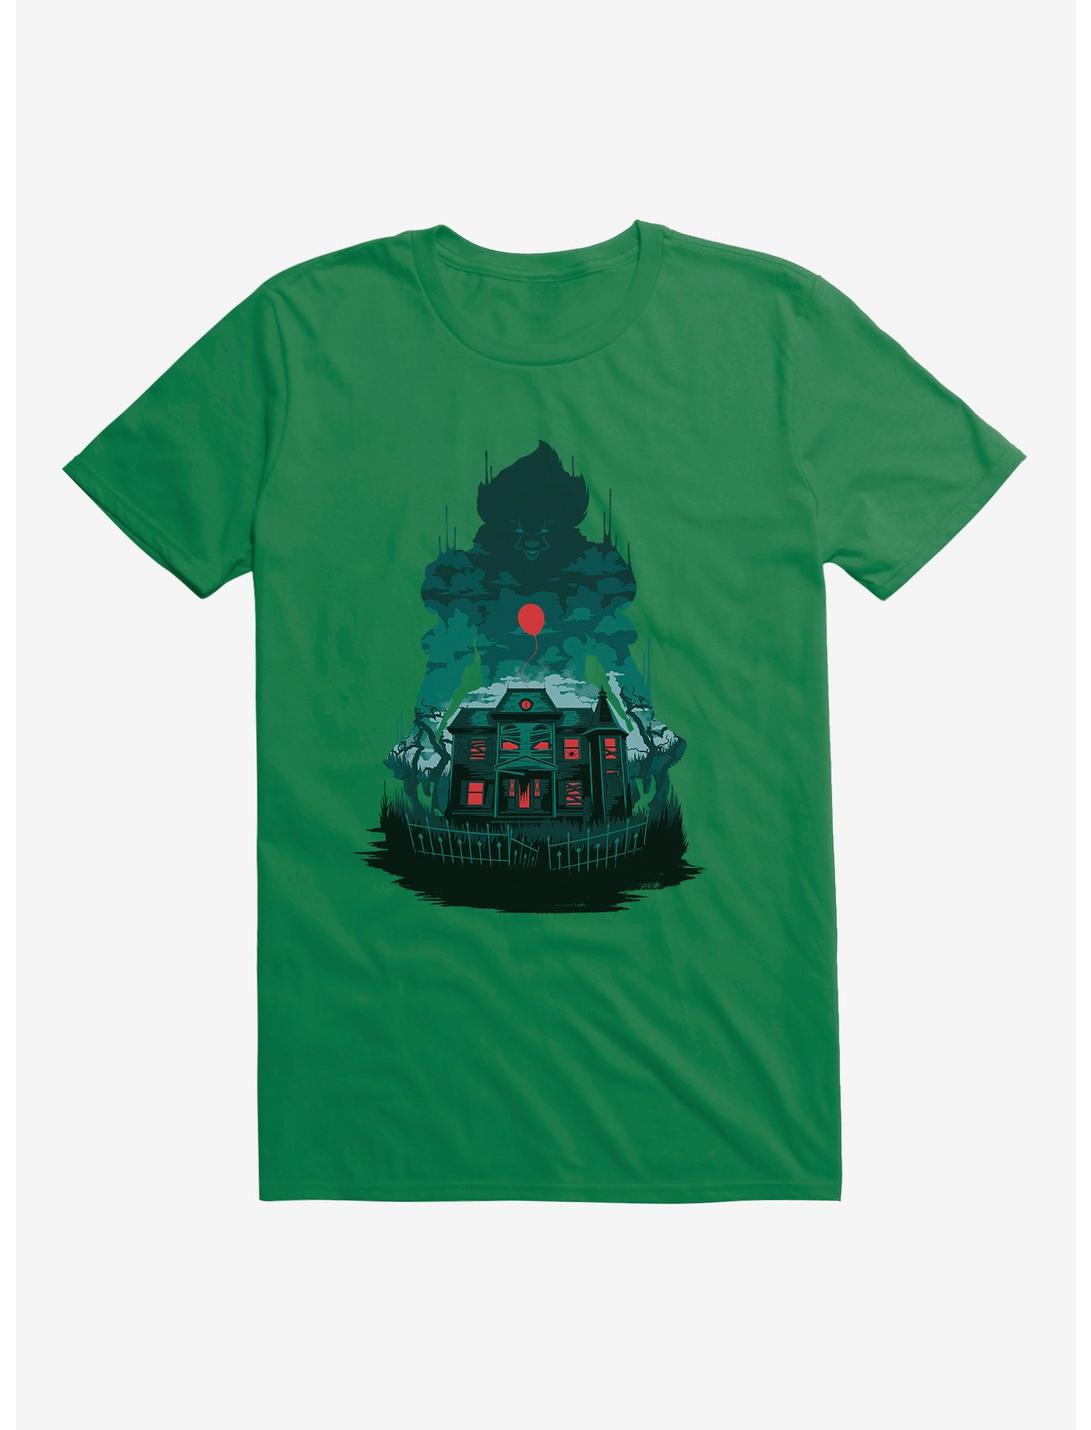 IT Chapter Two Haunted House T-Shirt, KELLY GREEN, hi-res